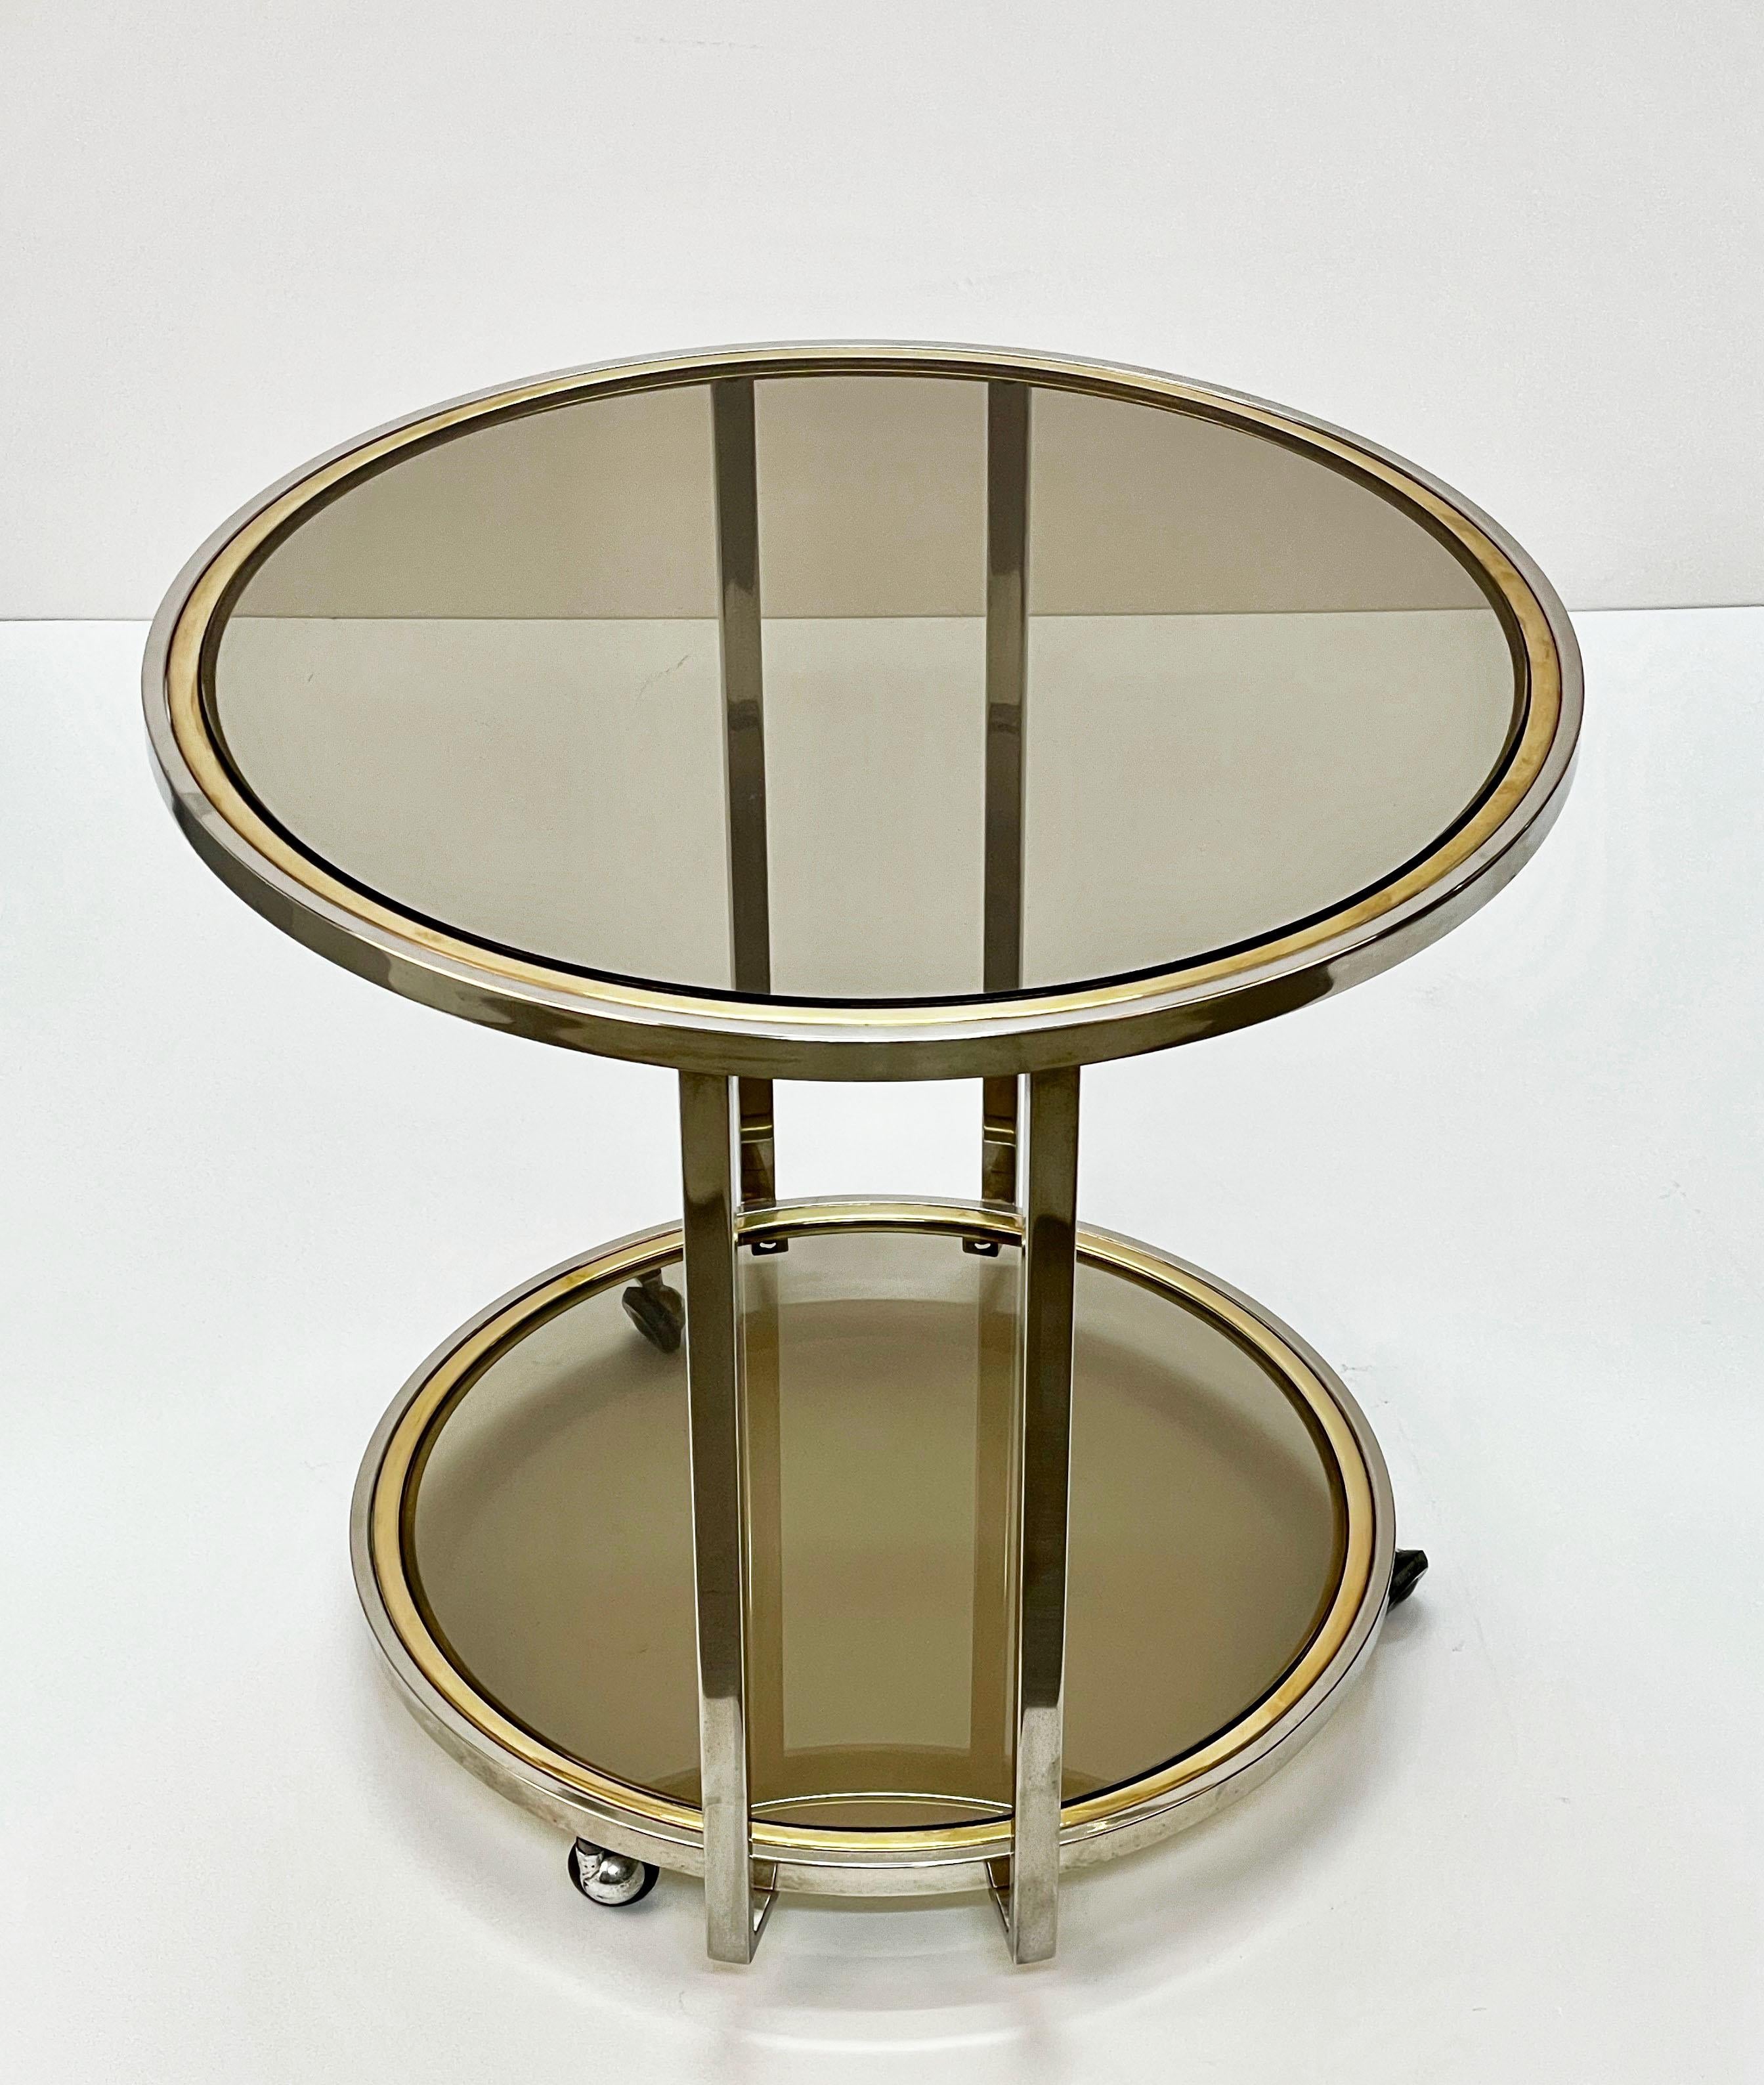 Midcentury Brass and Chrome and Glass Italian Coffee Table after Romeo Rega 1970 For Sale 7